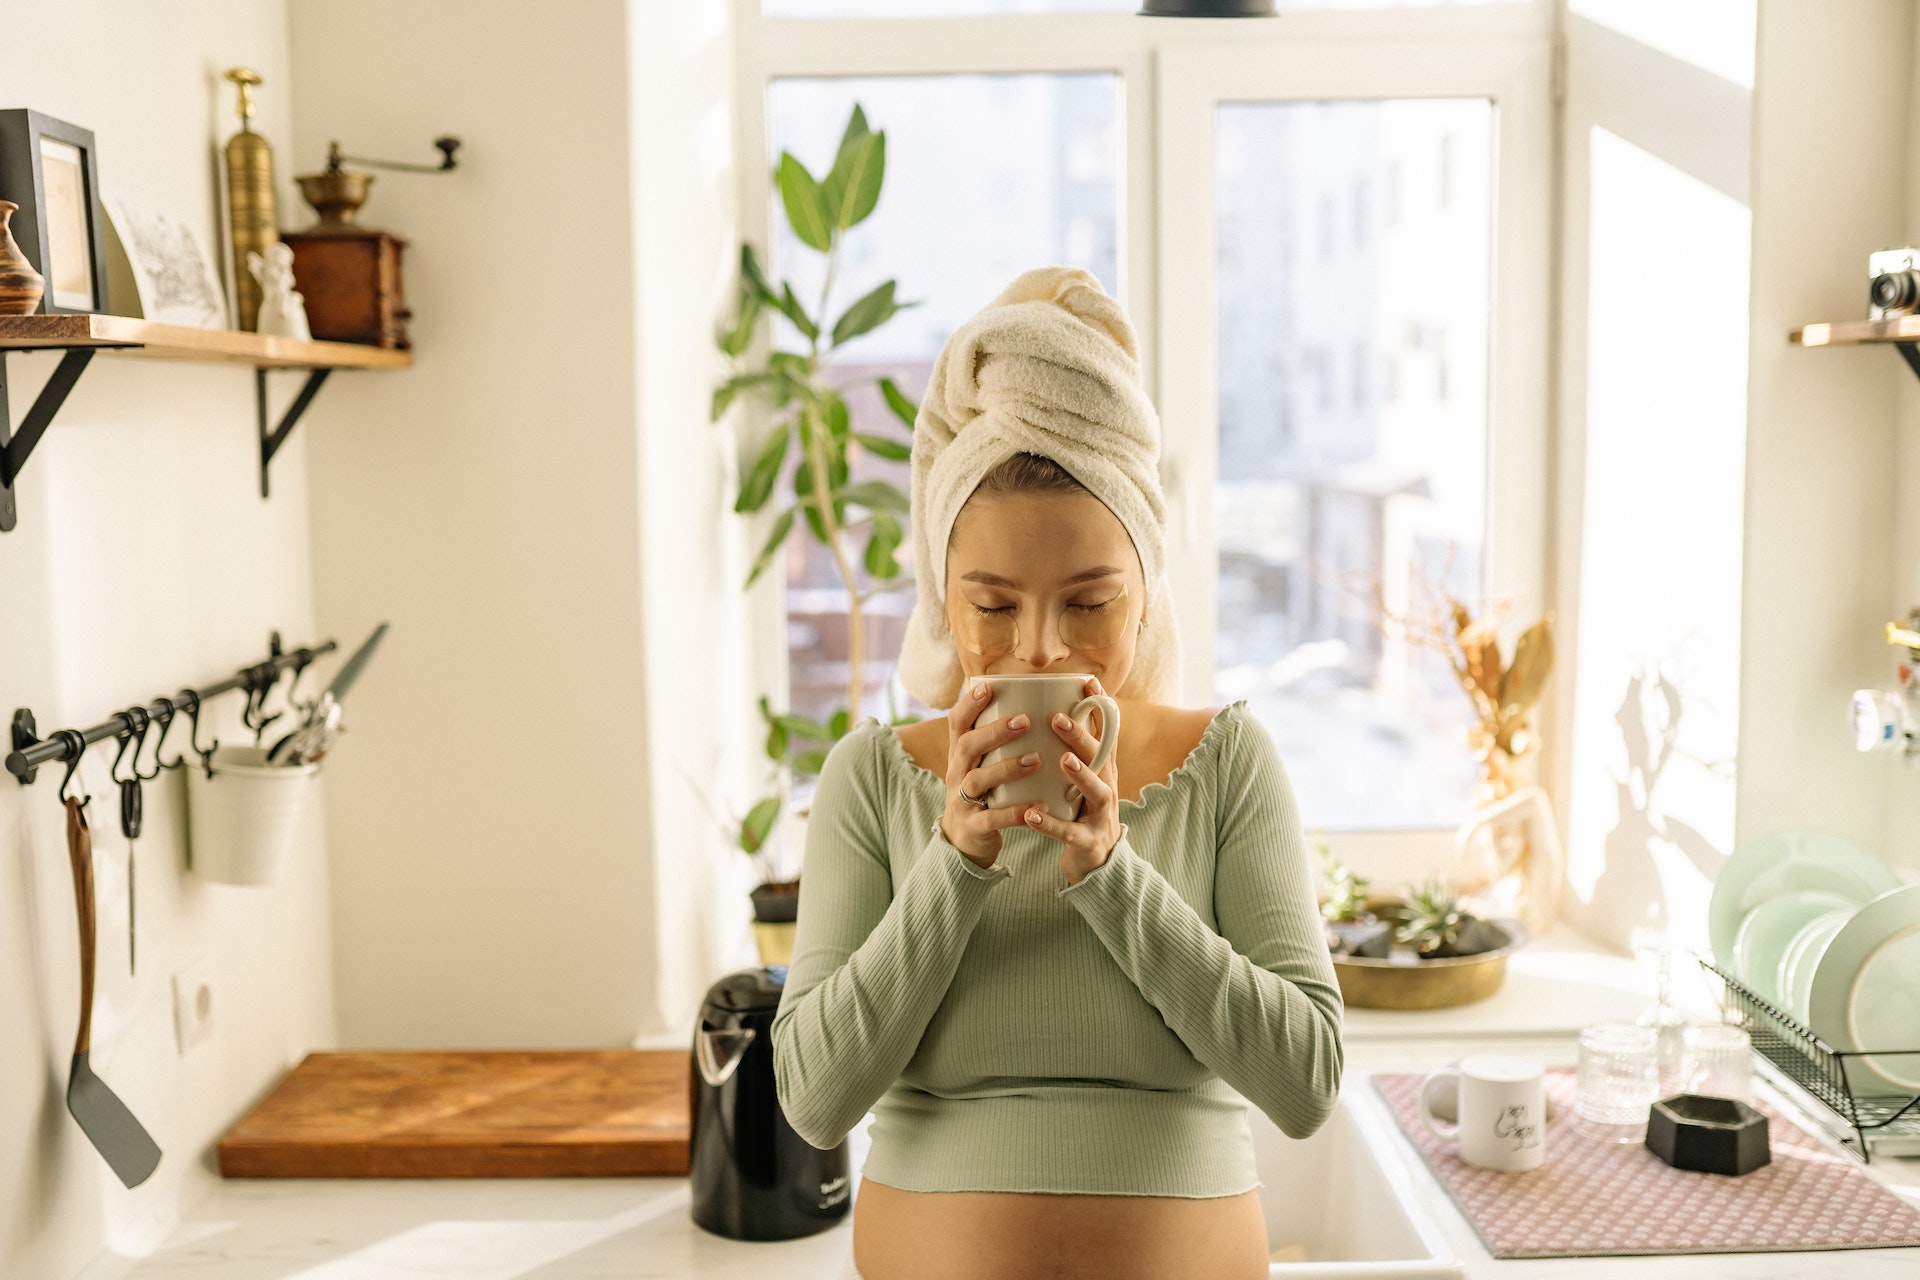 A pregnant woman smelling a cup | Source: Pexels